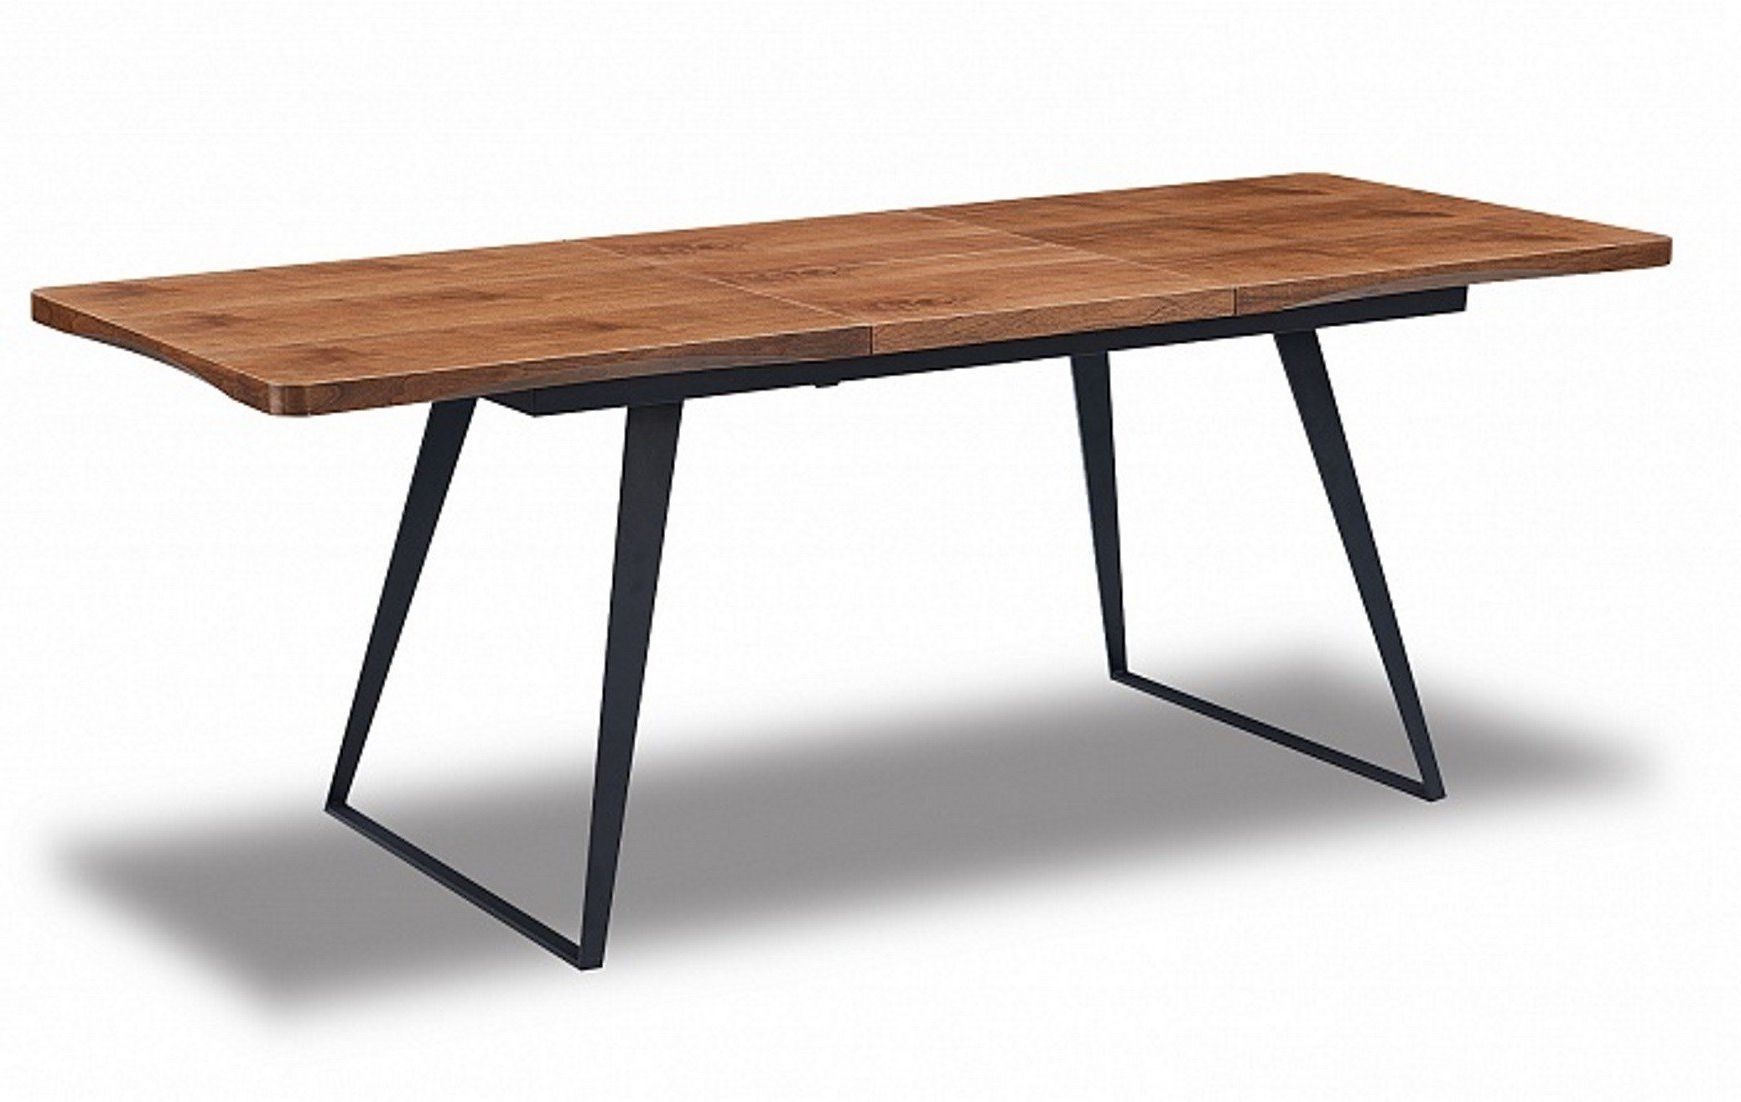 Union Rustic Odonnell Extendable Dining Table (View 10 of 20)